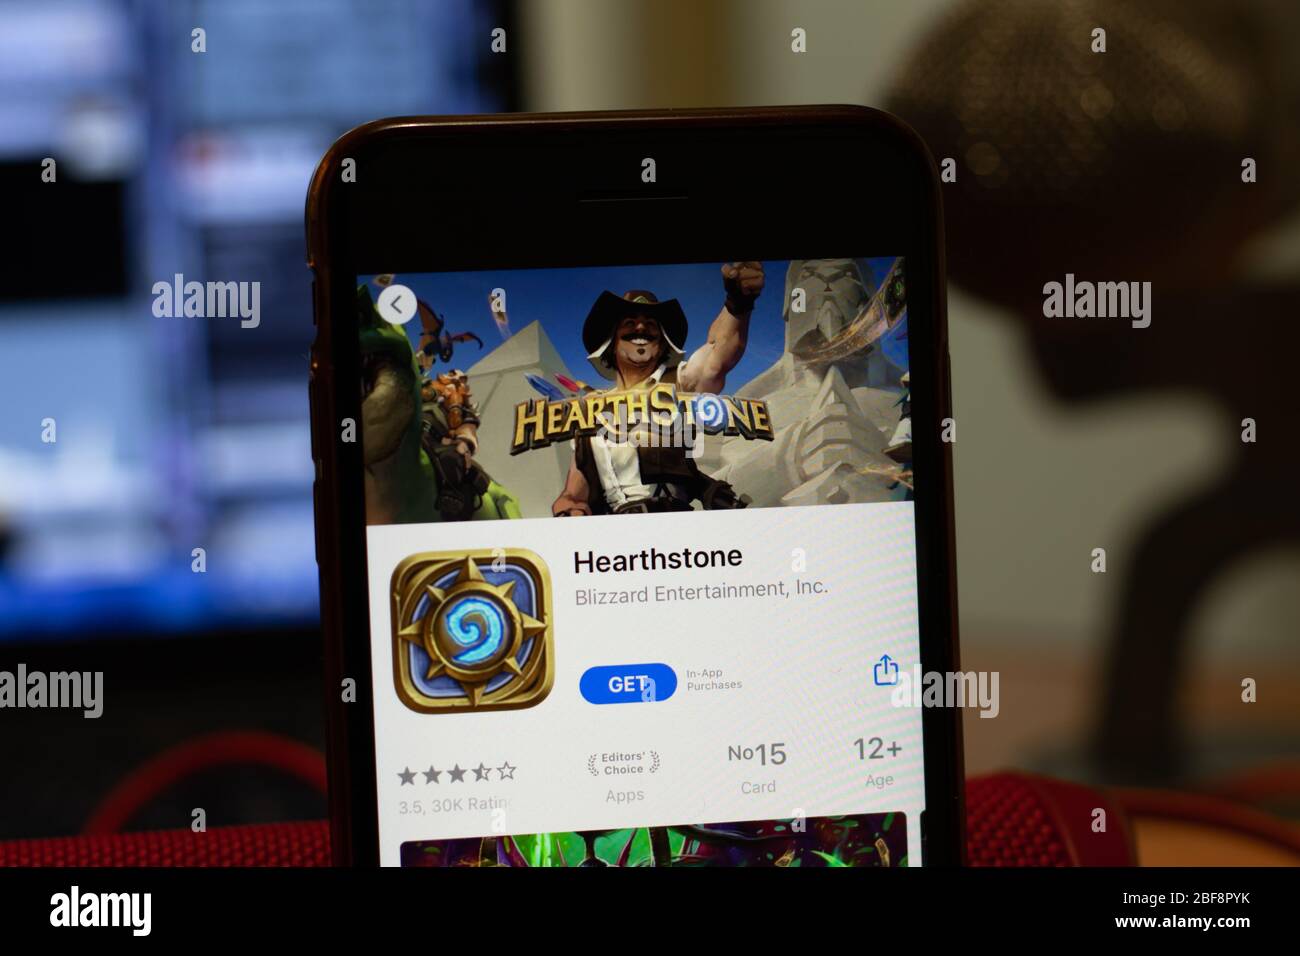 Los Angeles, California, USA - 16 April 2020: Hearthstone logo on screen close up. App store icon visible on phone display, Illustrative Editorial Stock Photo